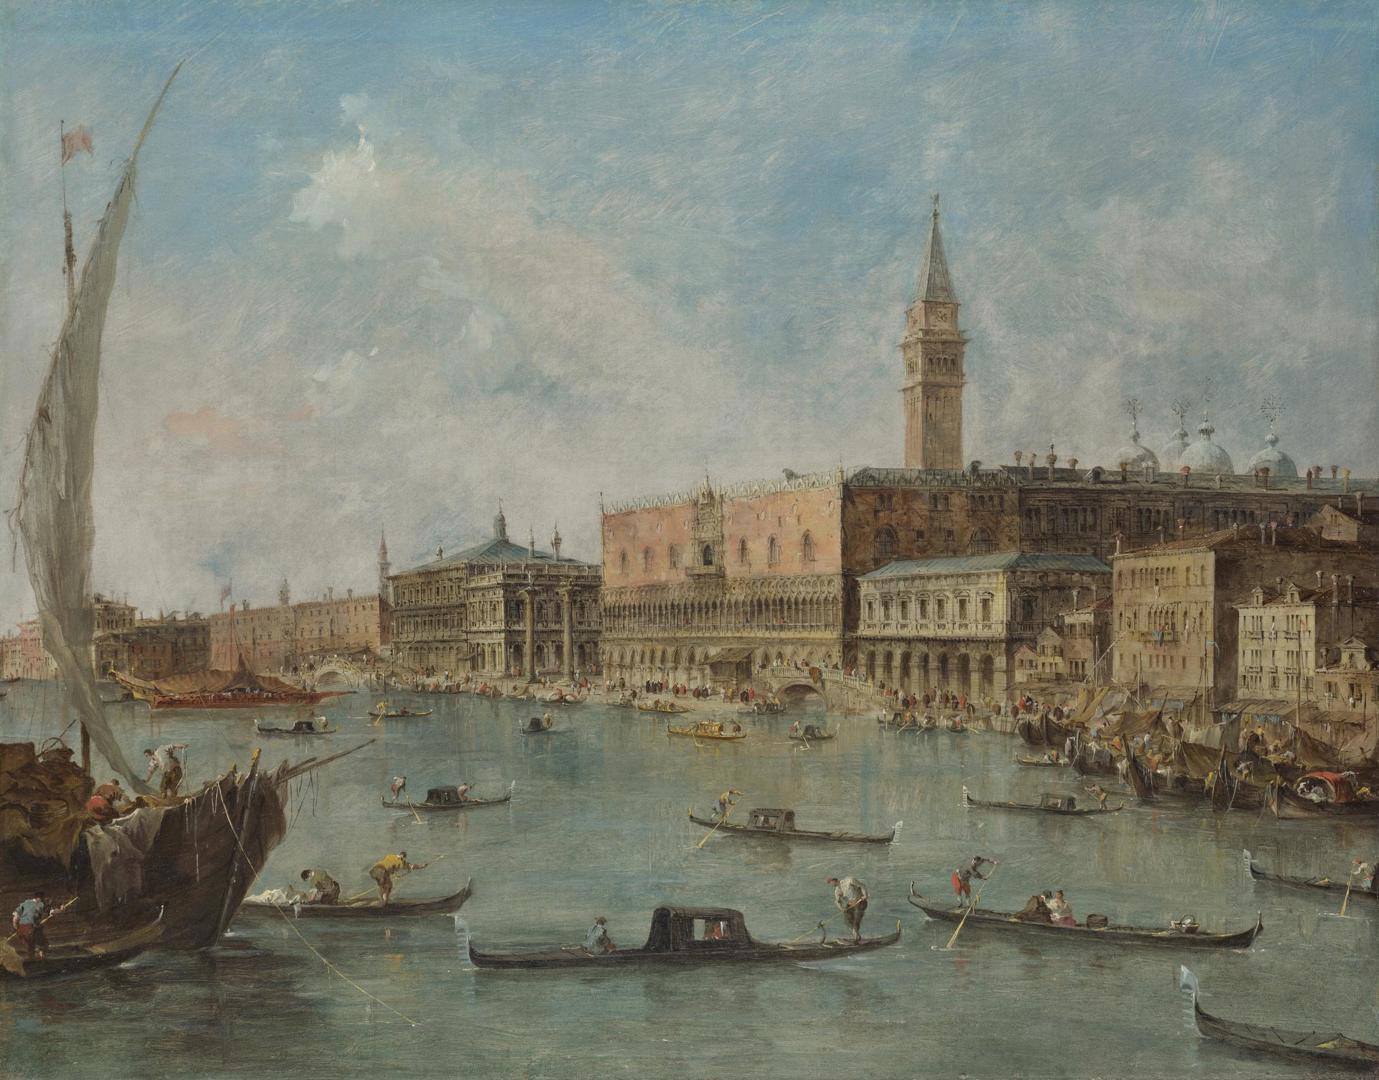 Venice: The Doge's Palace and the Molo by Francesco Guardi